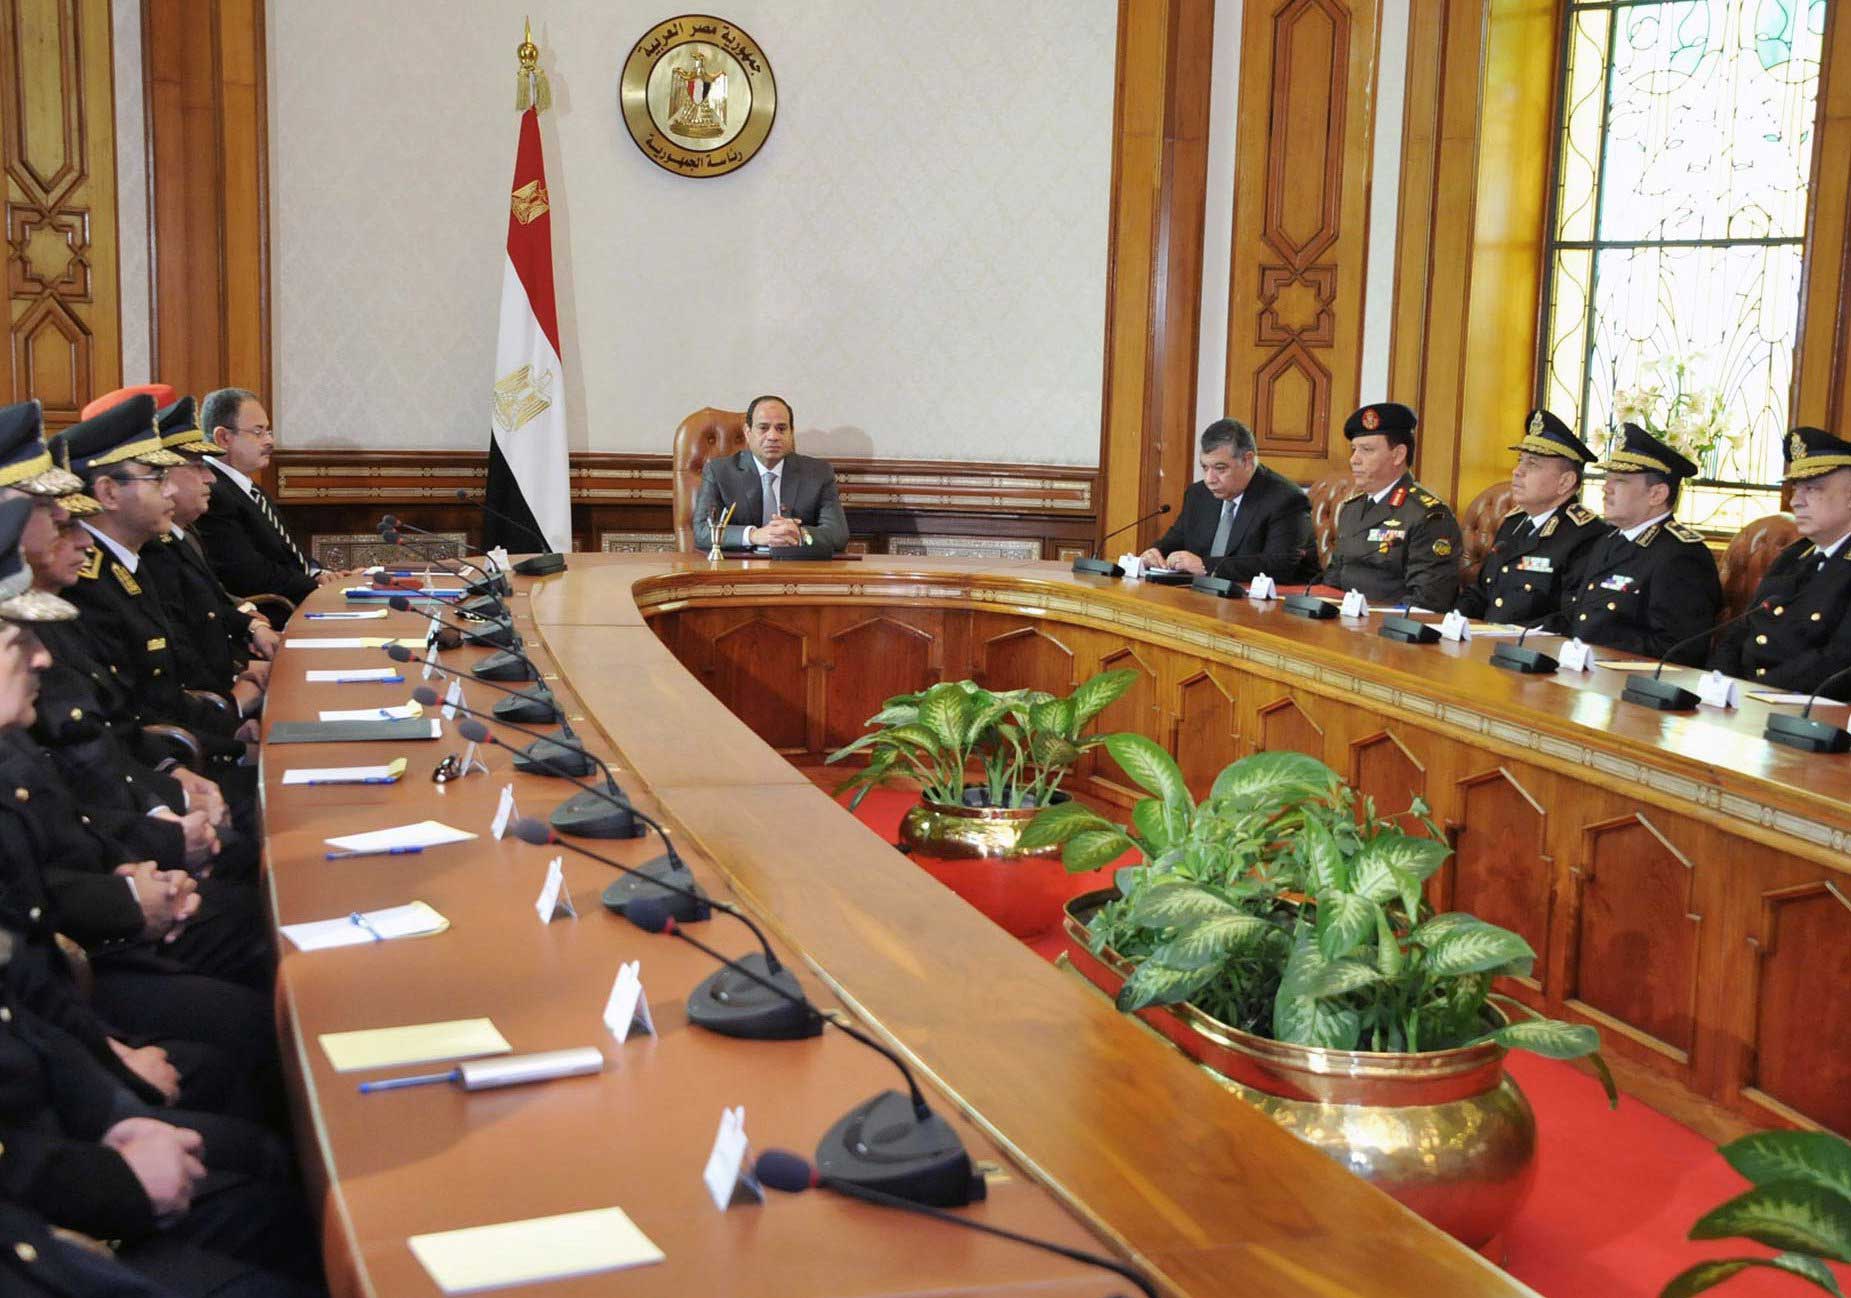 President Abdul Fattah al-Sisi meeting with his Interior Minister Magdy Abdel Ghaffar, the chief of intelligence and military officials in Cairo on April 16, 2015.